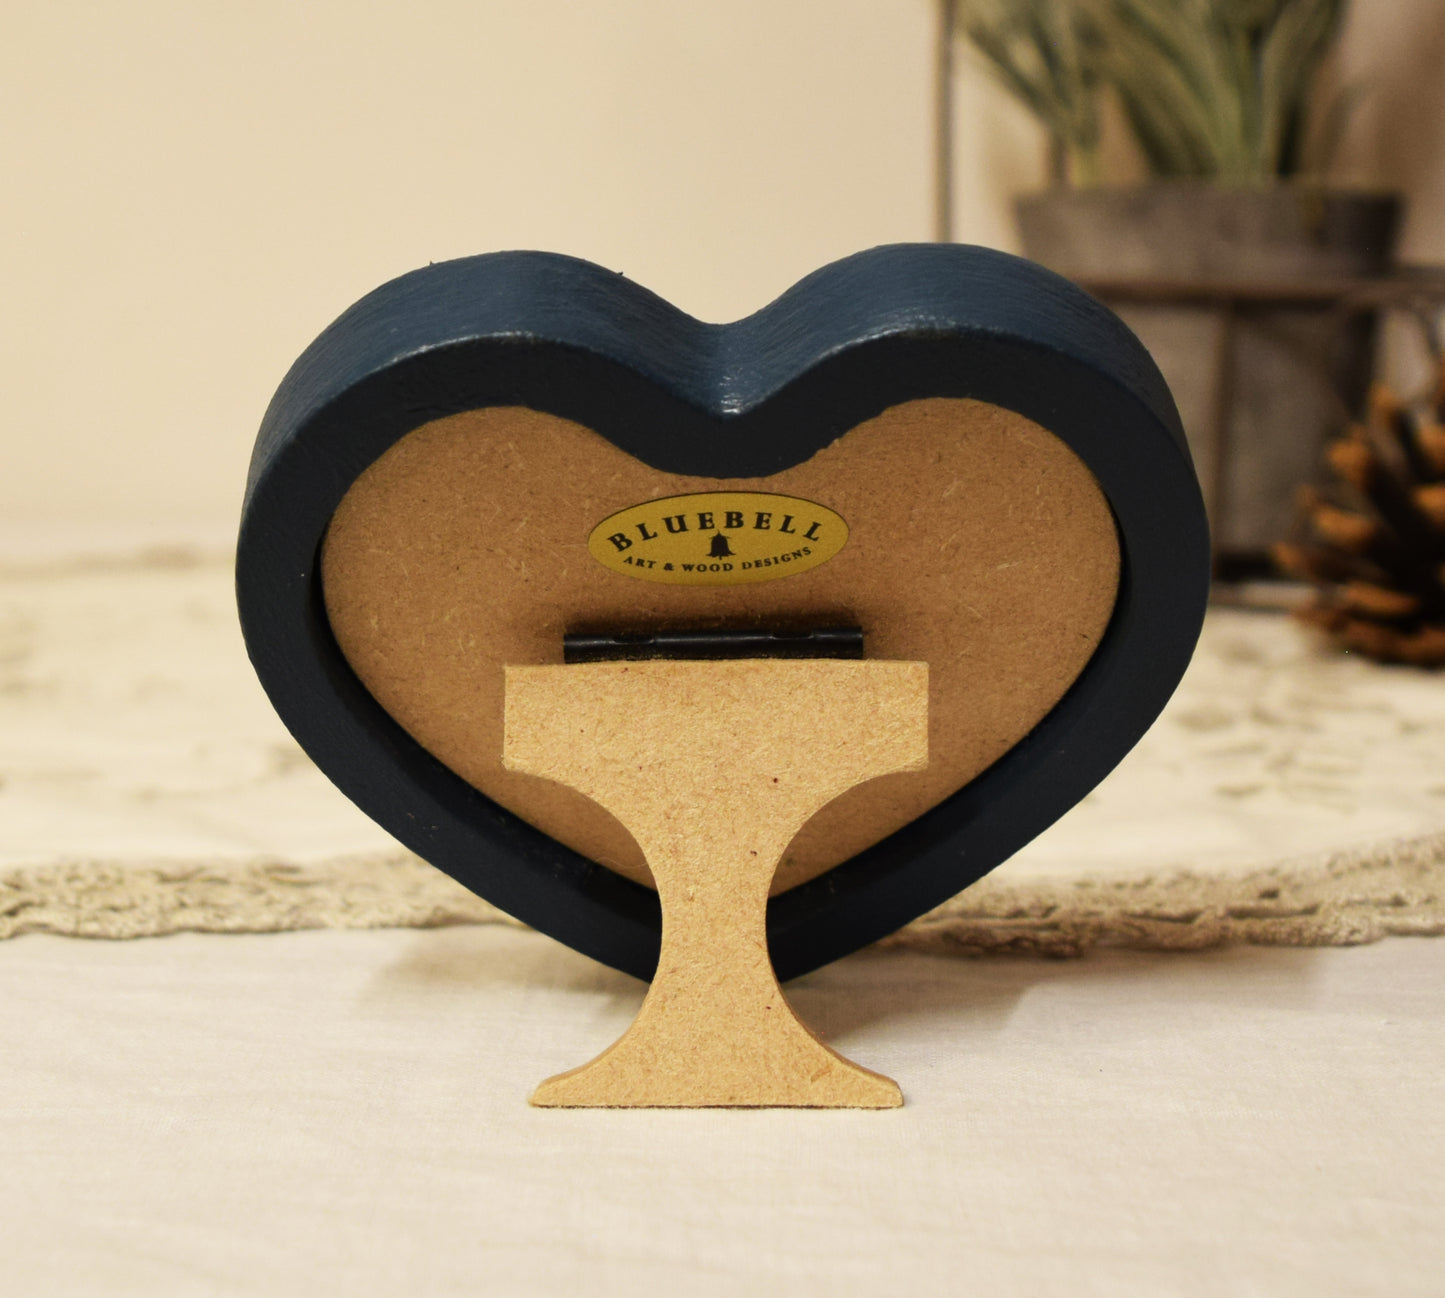 Teal Blue 3" x 3" Heart Handmade Wooden Photo Picture Frame